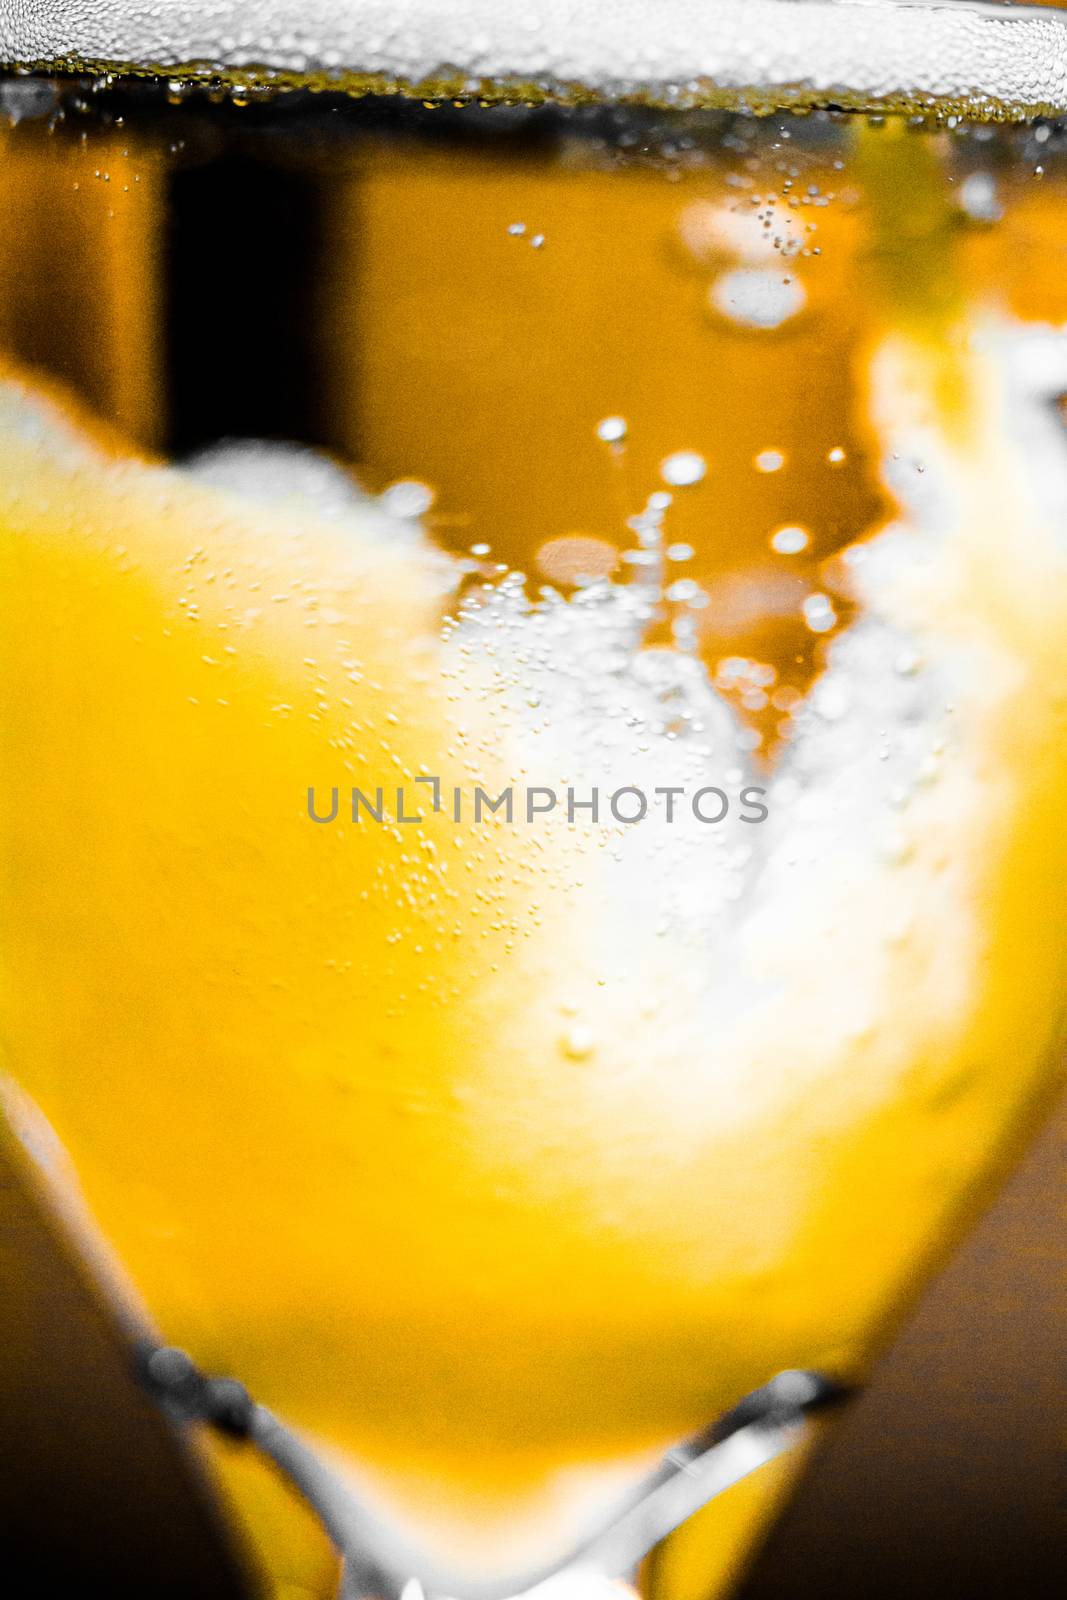 Extreme Closeup Abstract Macro Photo of Orange Mixing with Champagne for a Mimosa